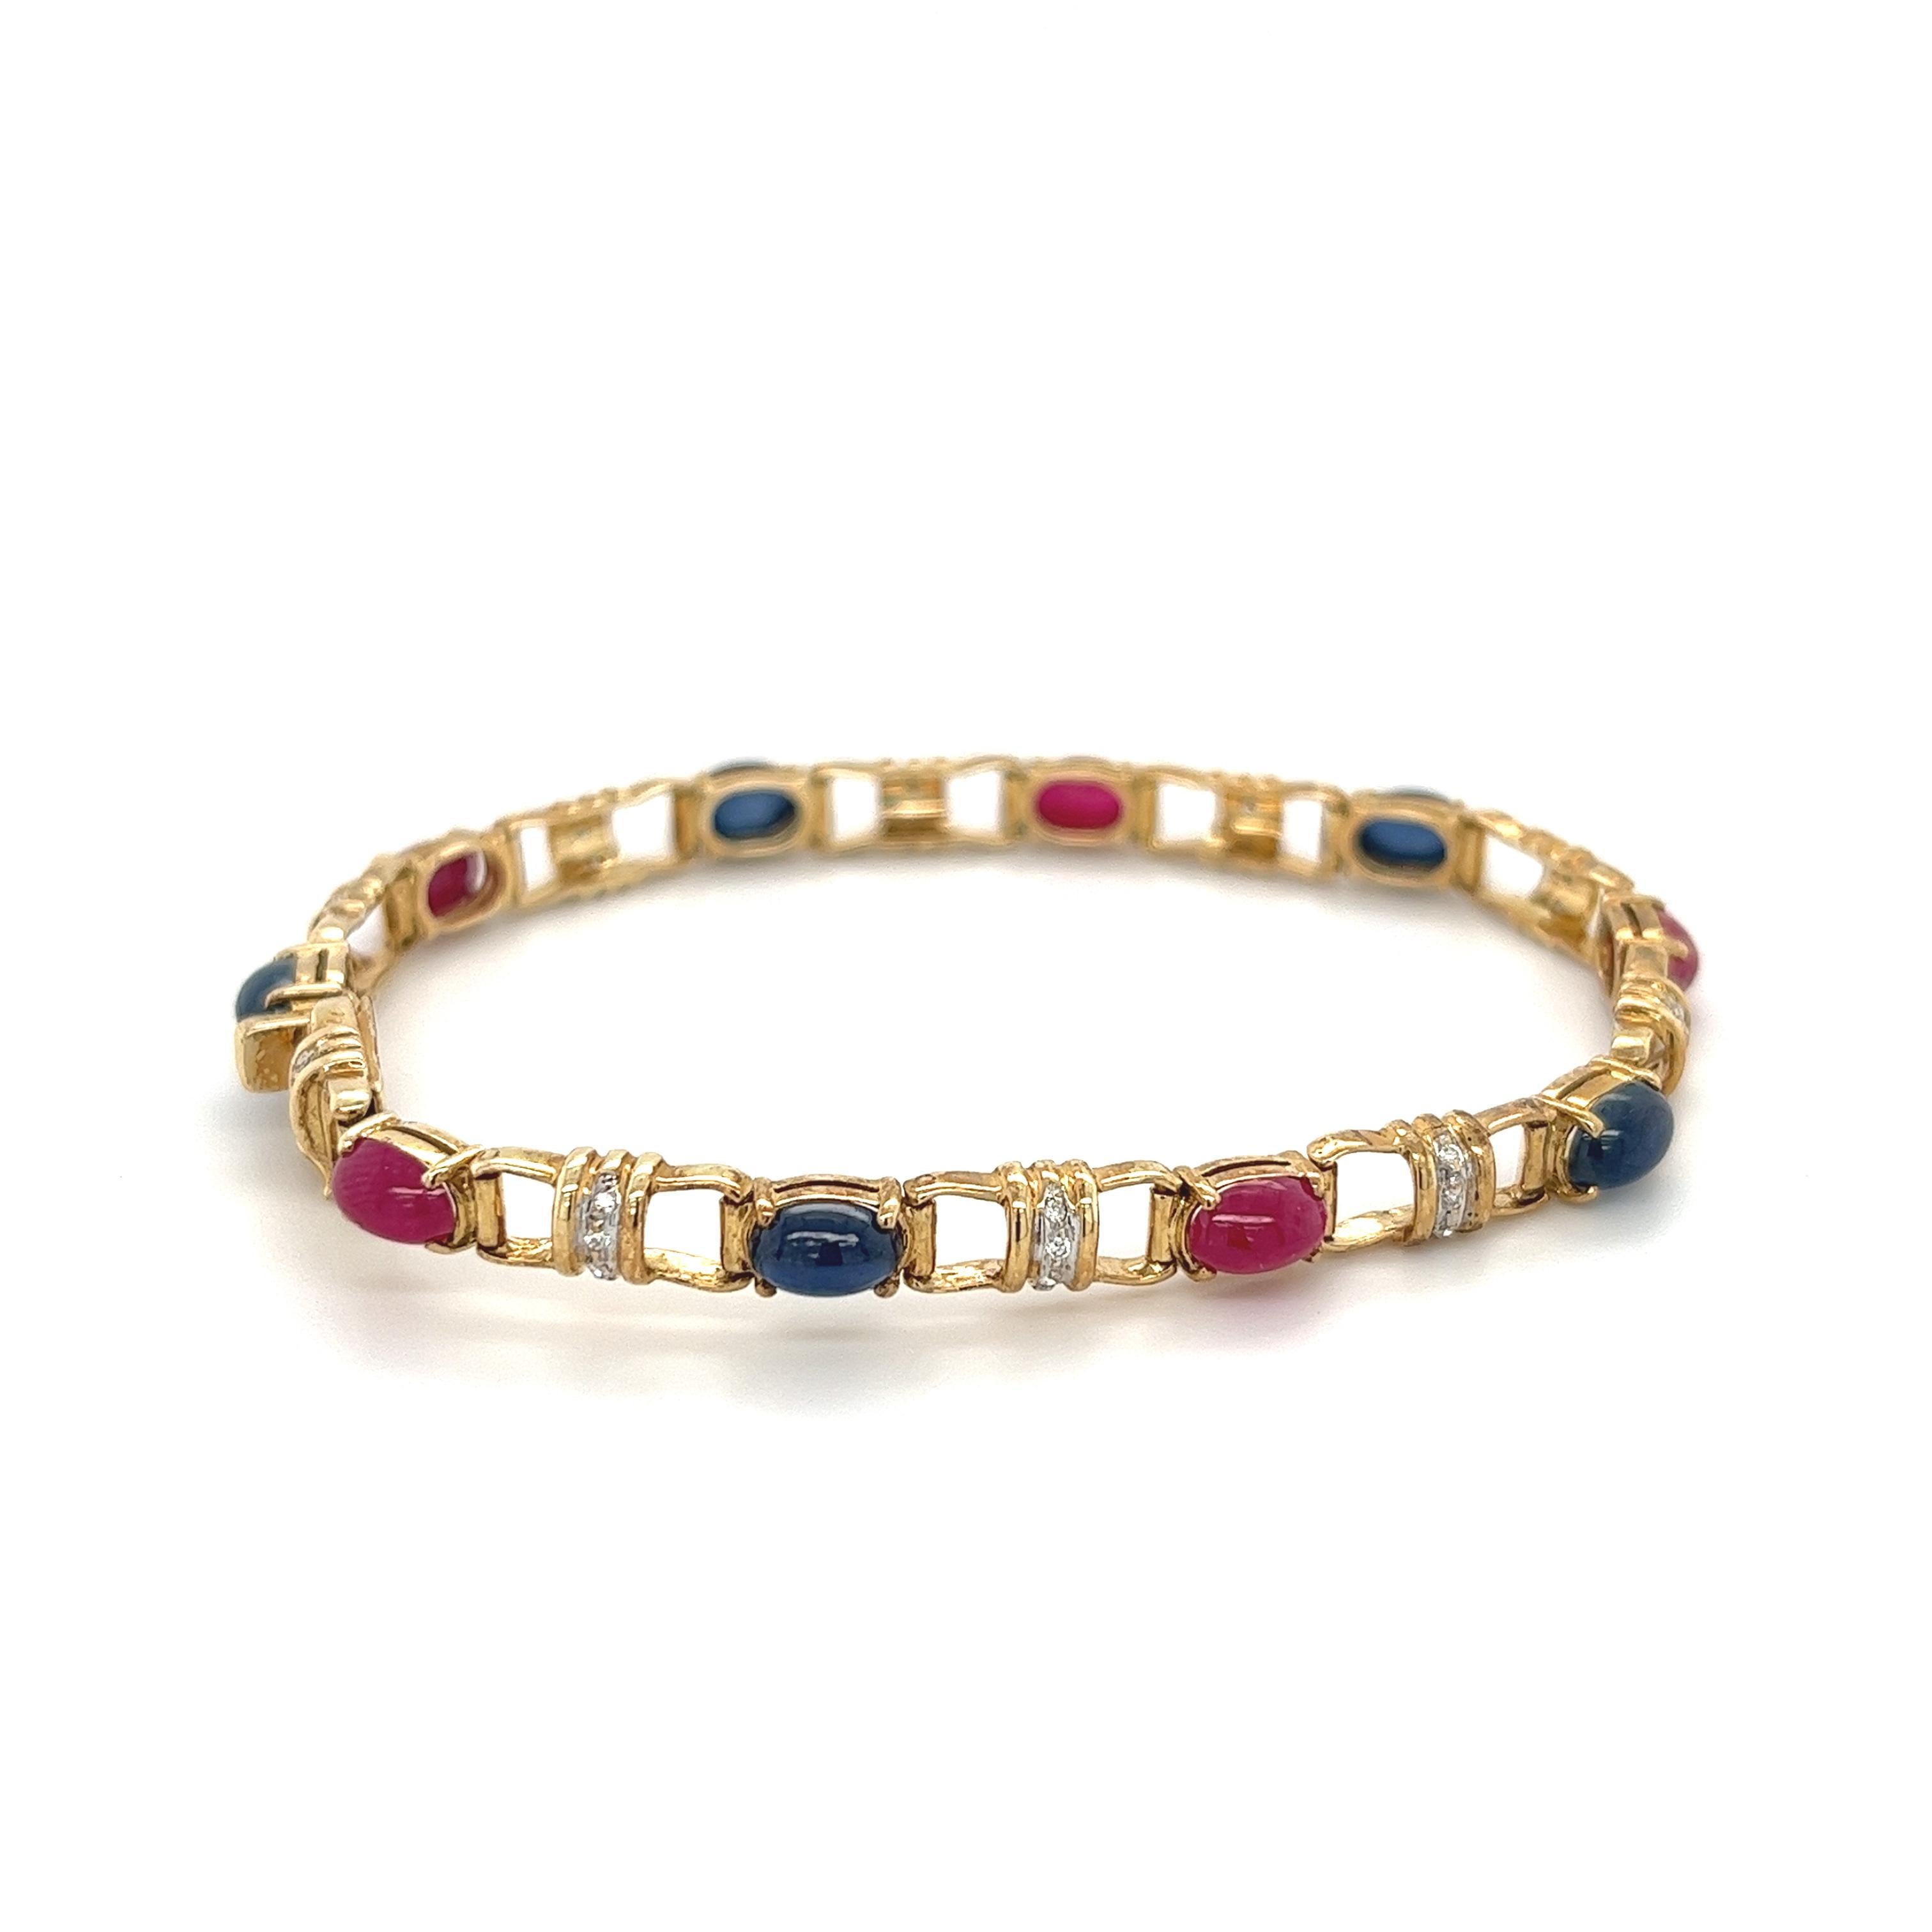 Cabochon Cut Blue Sapphire, Ruby and Diamond Charm Bracelet in 18k Gold For Sale 1